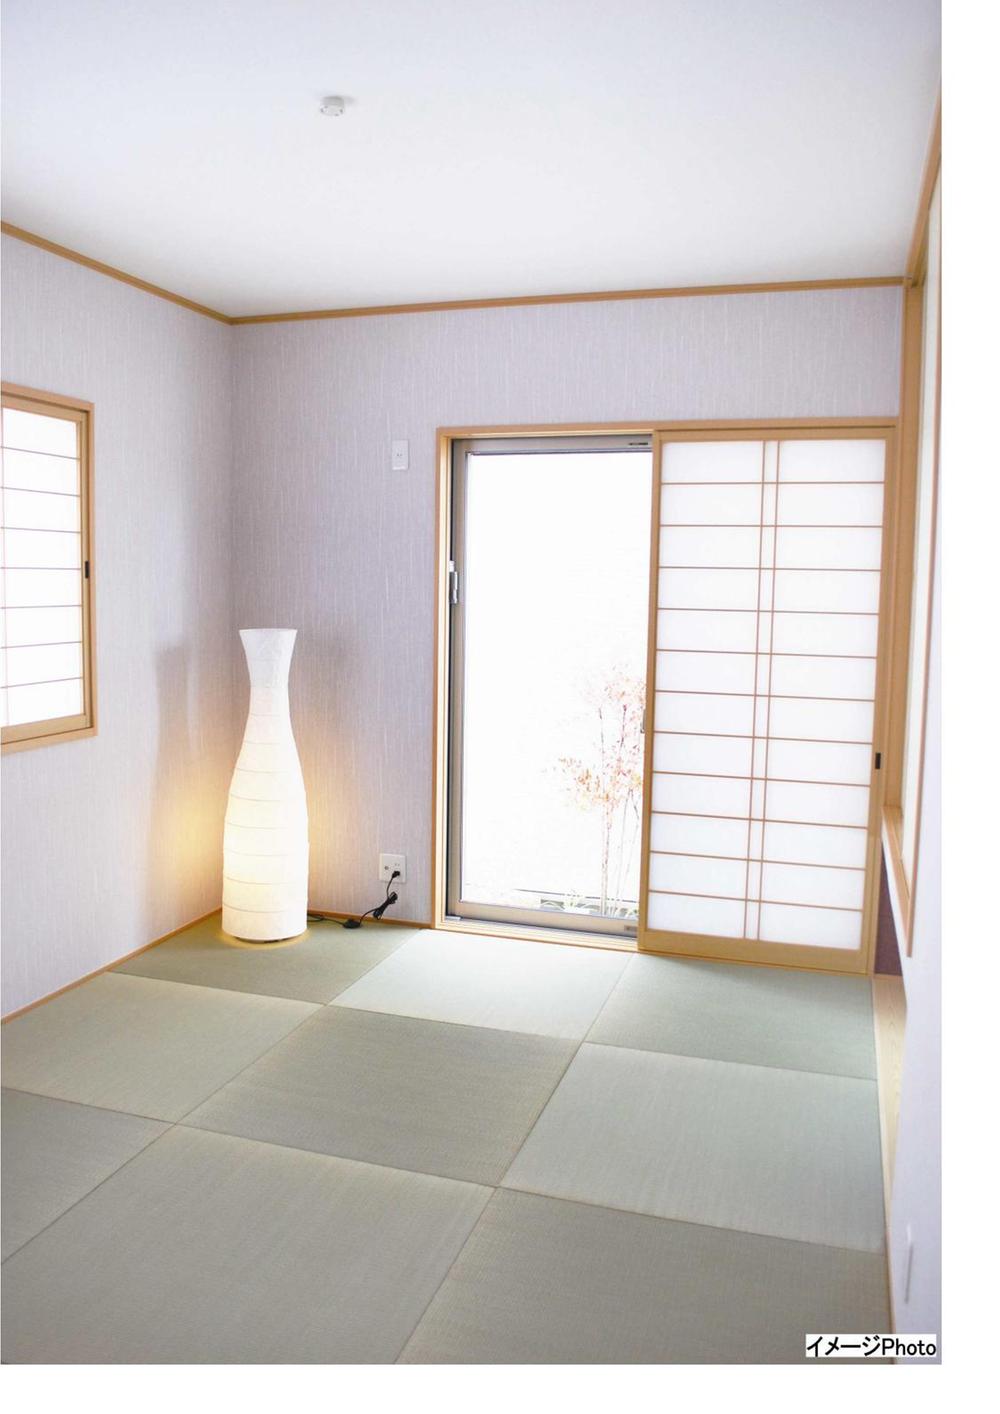 Non-living room. Free Plan: Japanese-style room